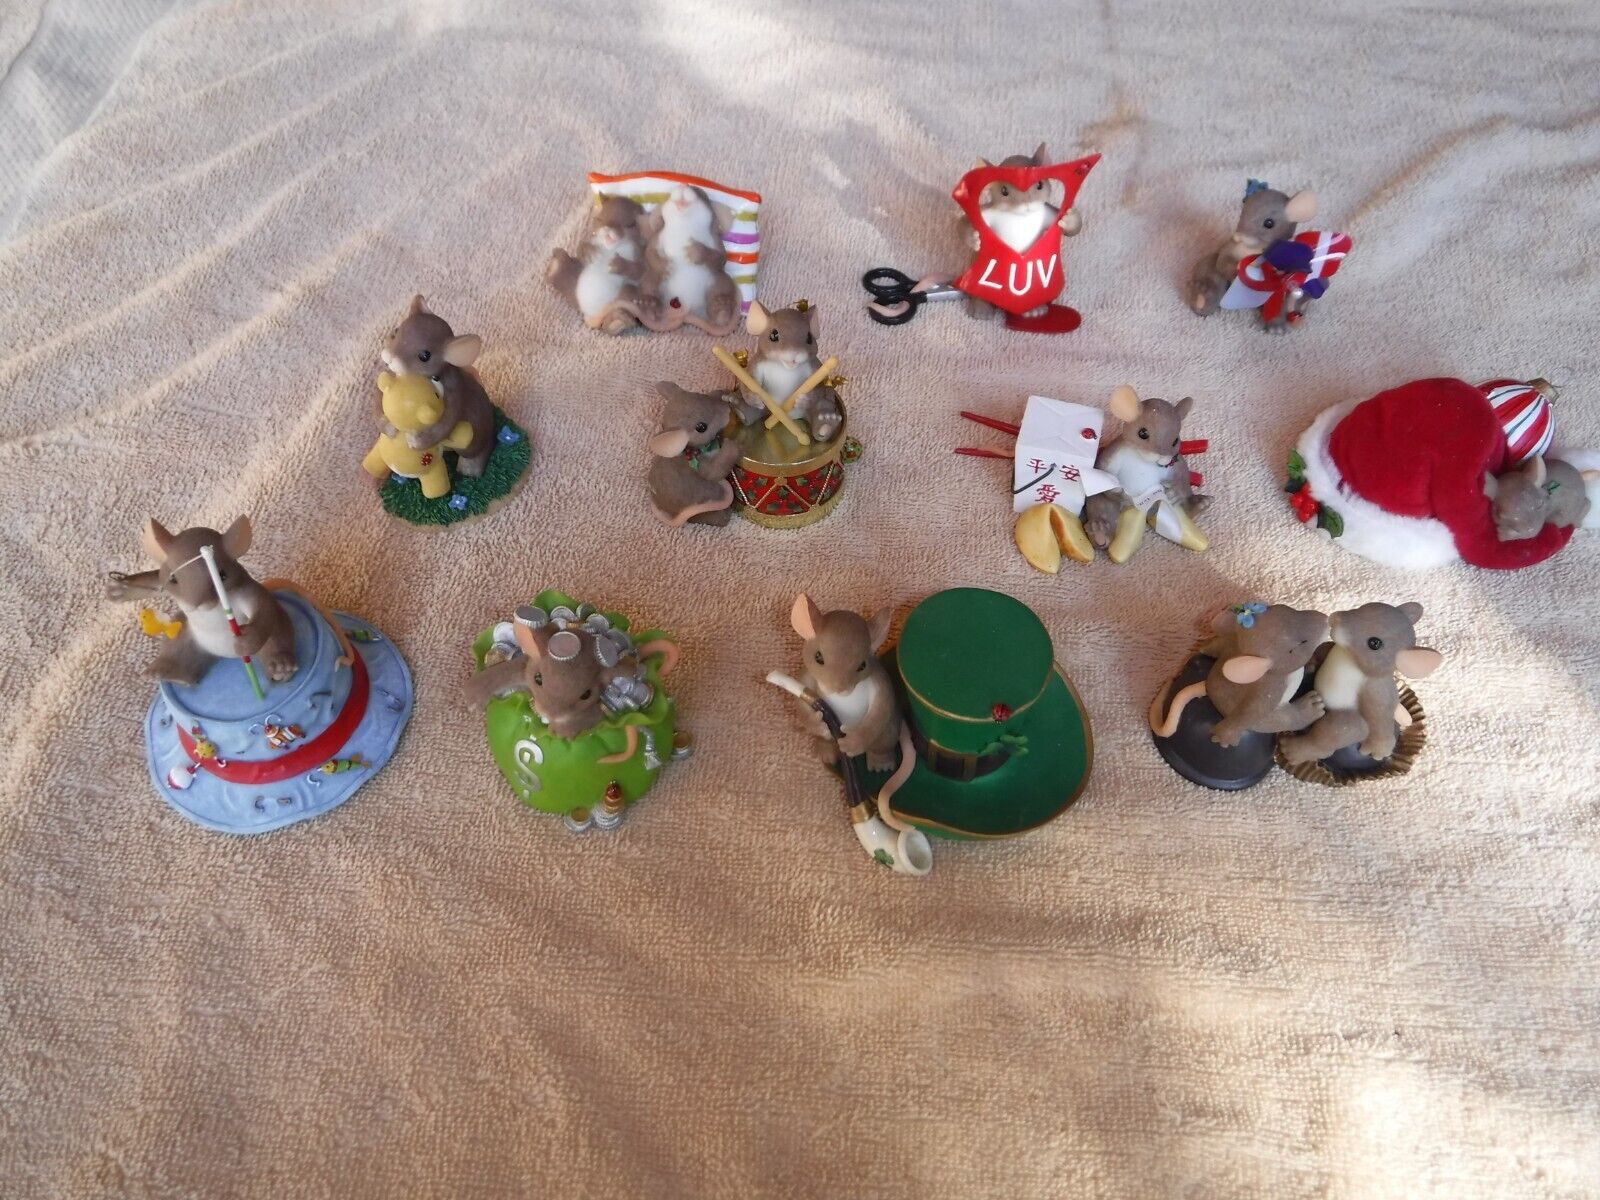 9 Diff. Fitz & Floyd Charming Tails Collection Figurines - Choose 2